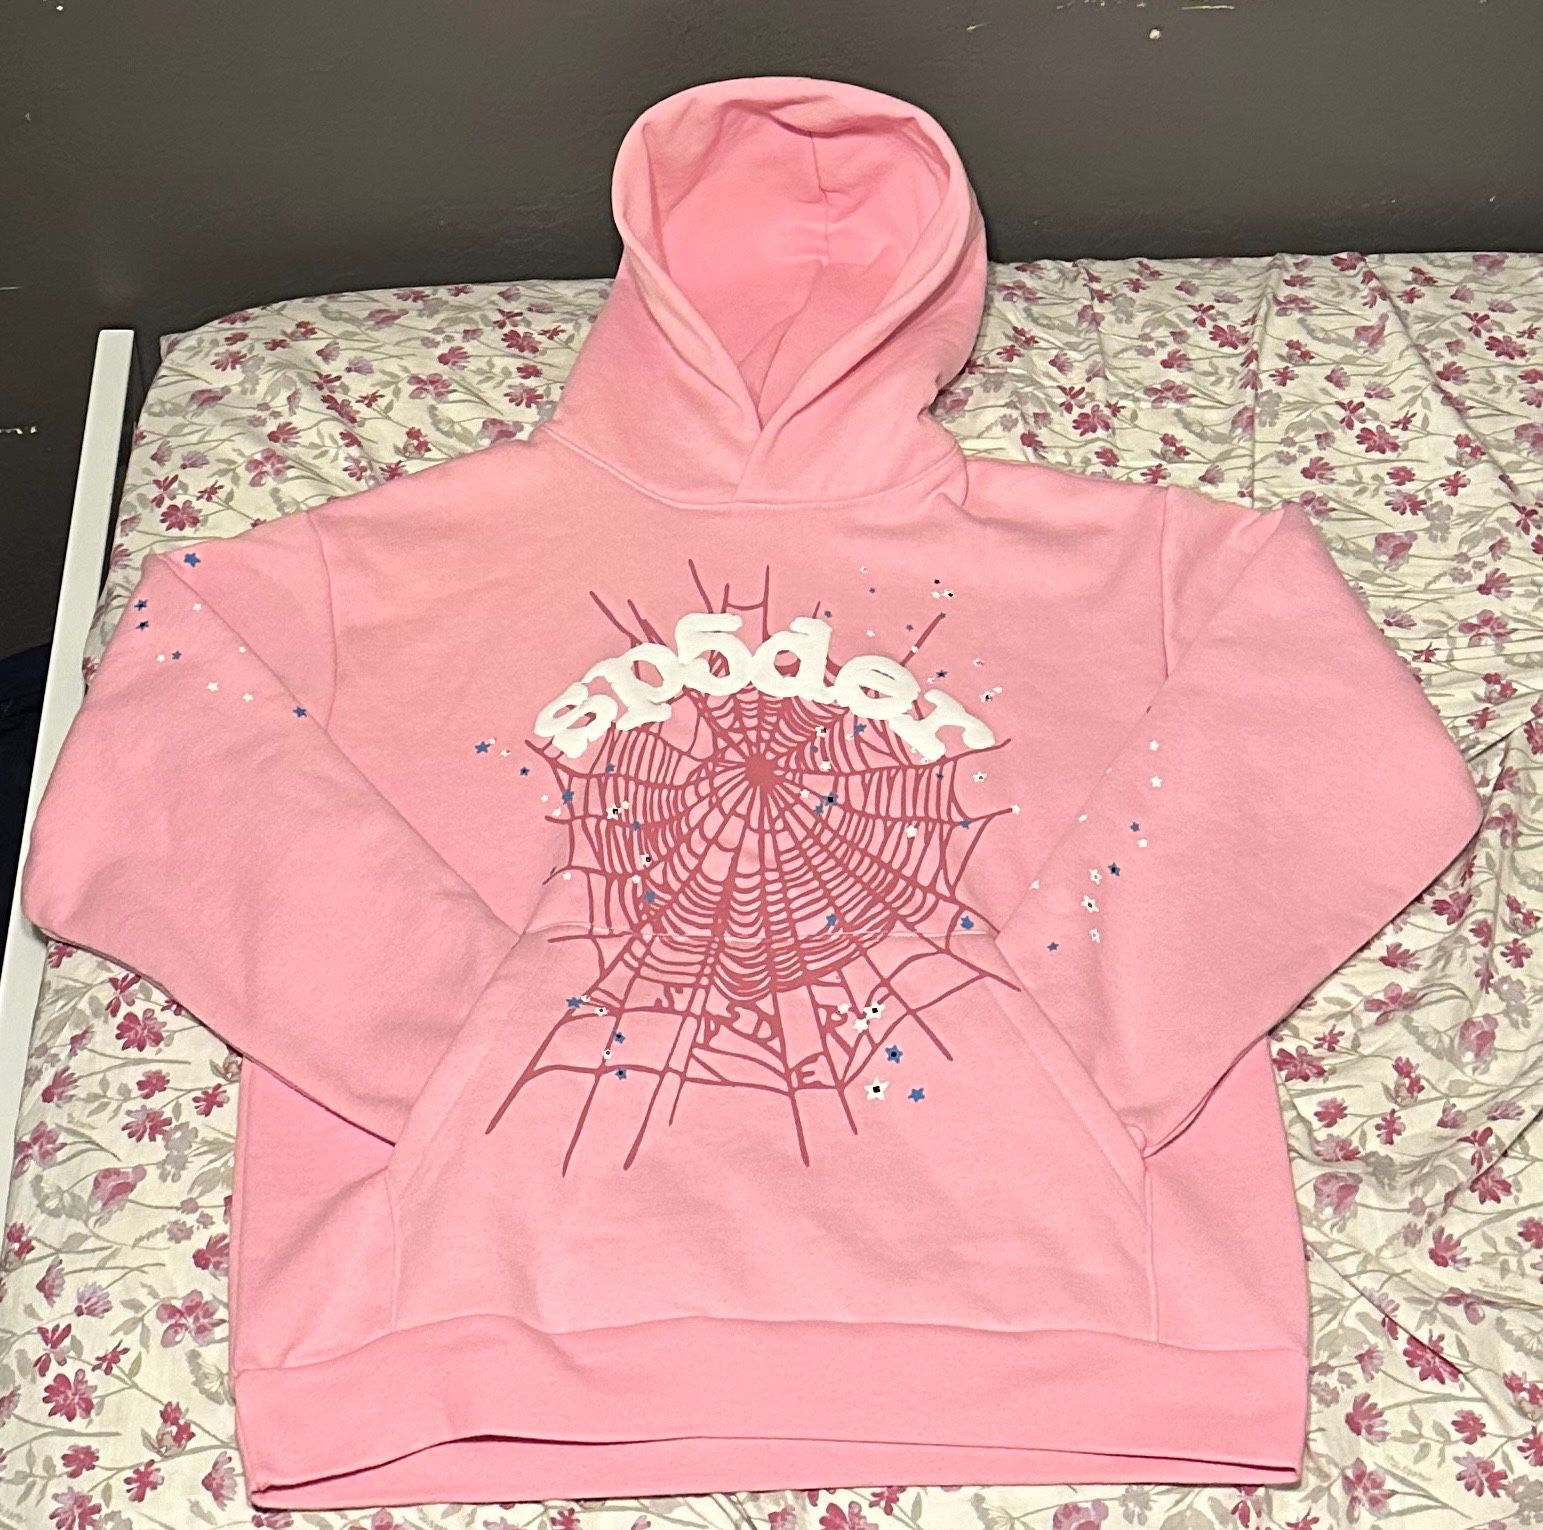 NEED GONE ASAP - pink sp5der hoodie - size large 